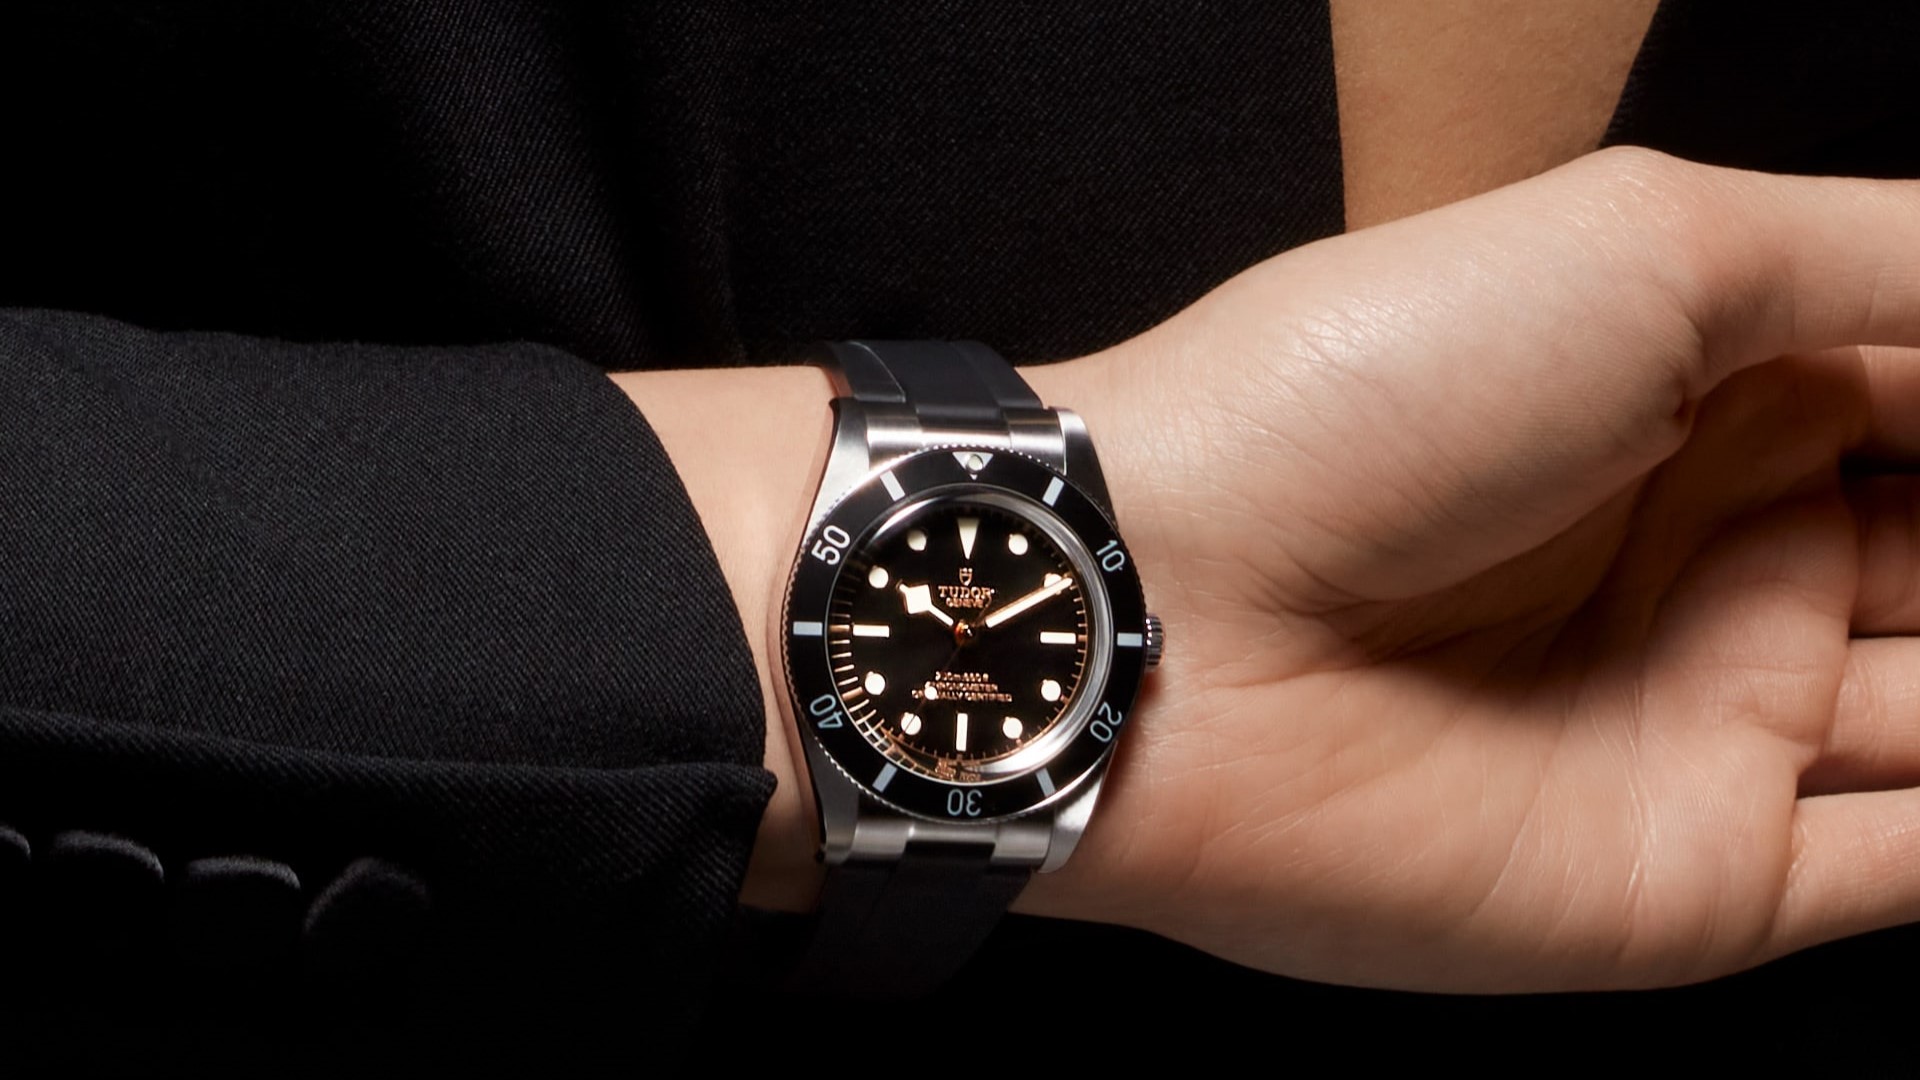 Bard: Write a detailed review of the new Tudor Black Bay 54 wrist watch.